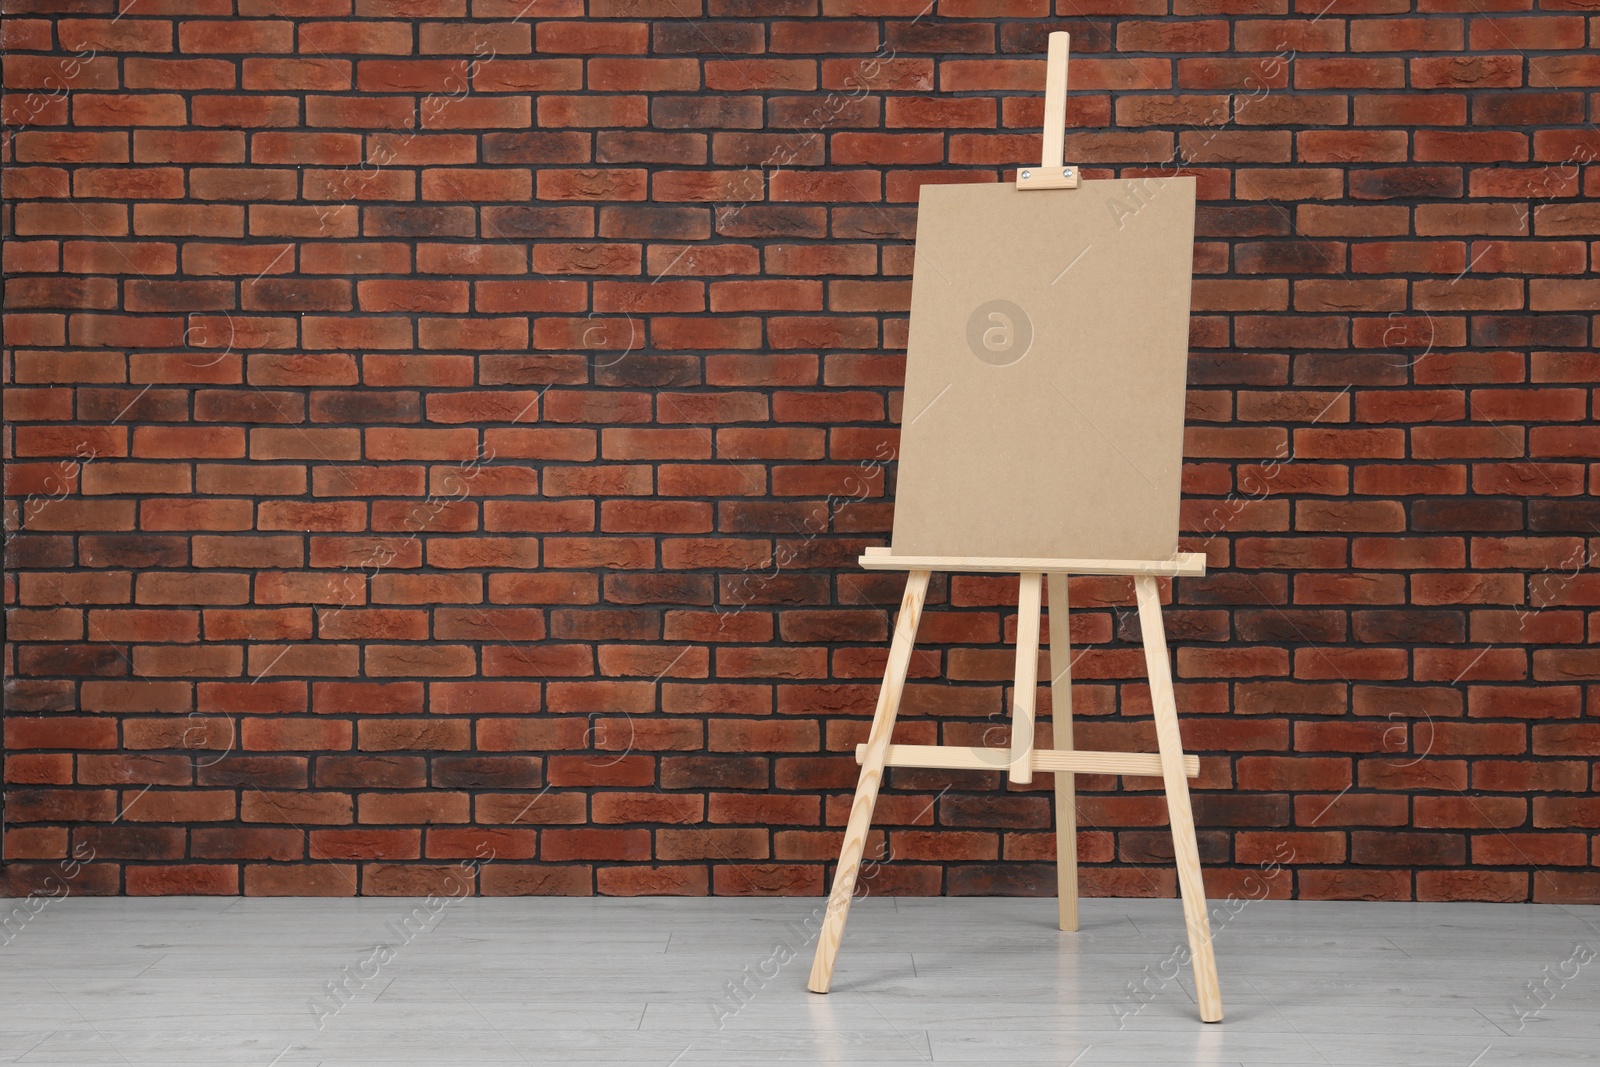 Photo of Wooden easel with blank board near brick wall indoors. Space for text